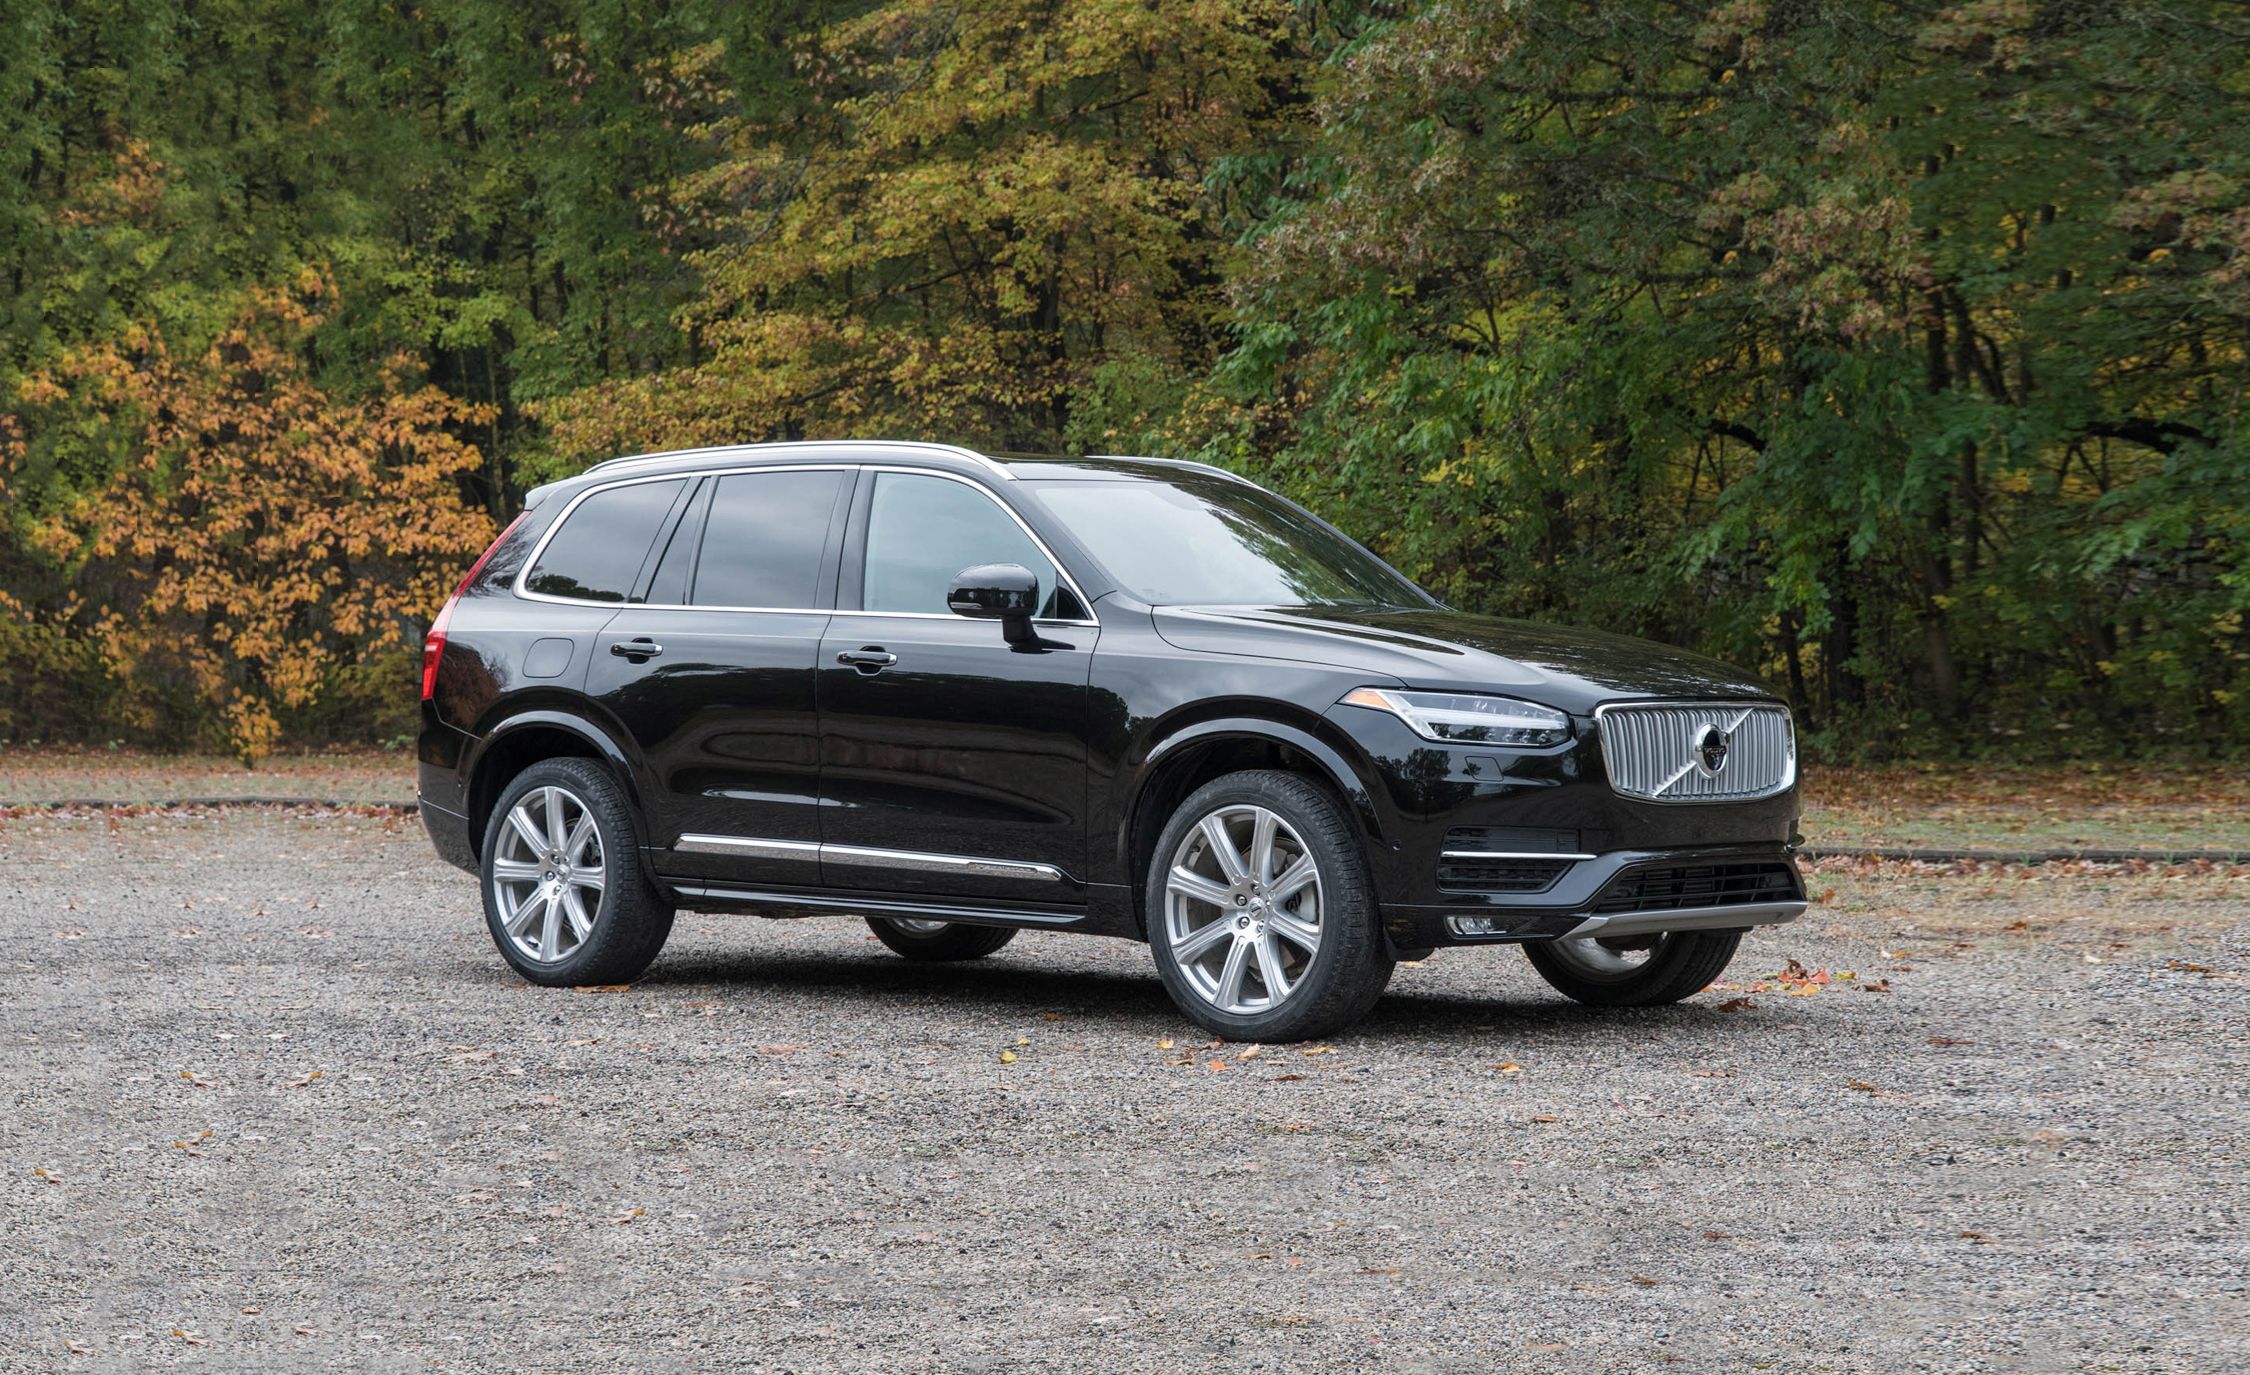 2020 Volvo XC90 Reviews | Volvo XC90 Price, Photos, and Specs | Car and Driver2250 x 1375